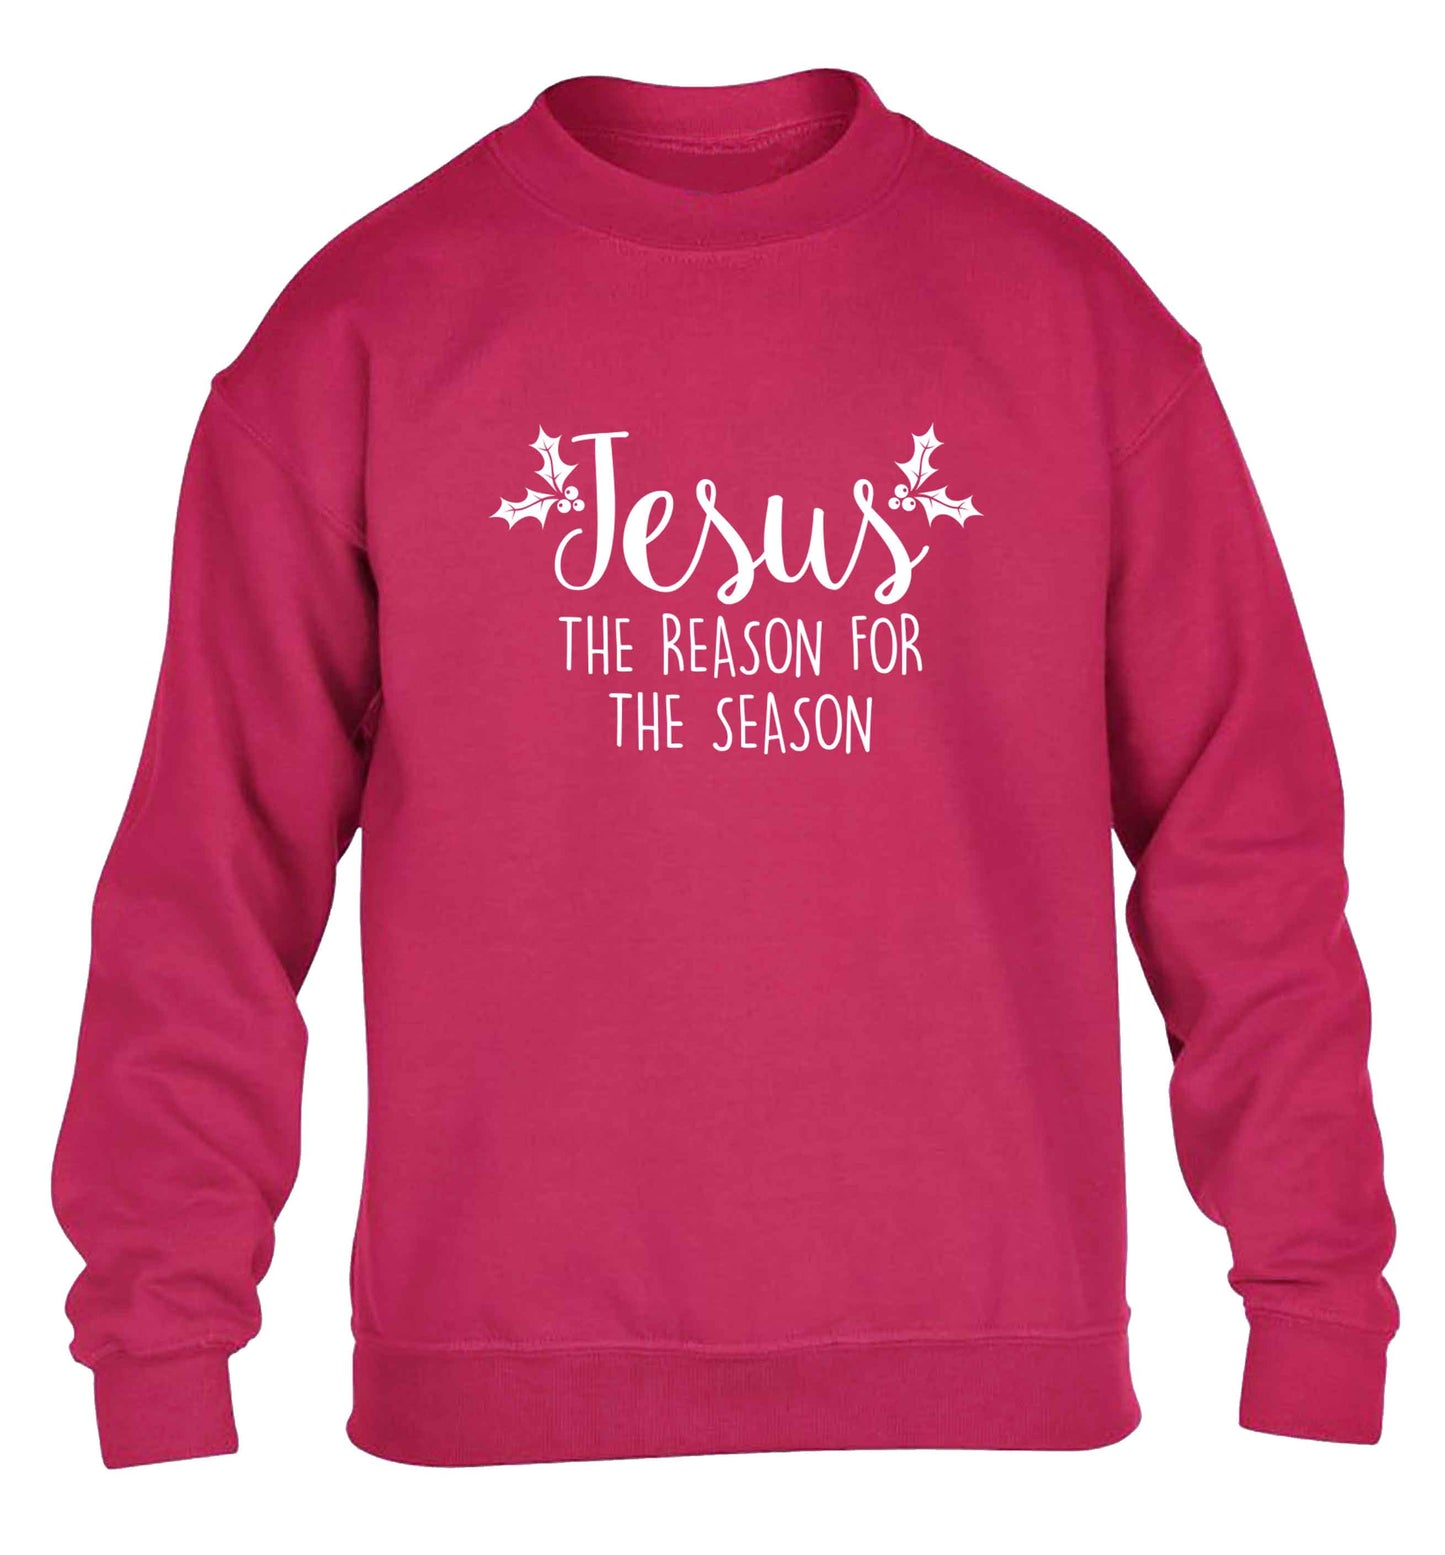 Jesus the reason for the season children's pink sweater 12-13 Years